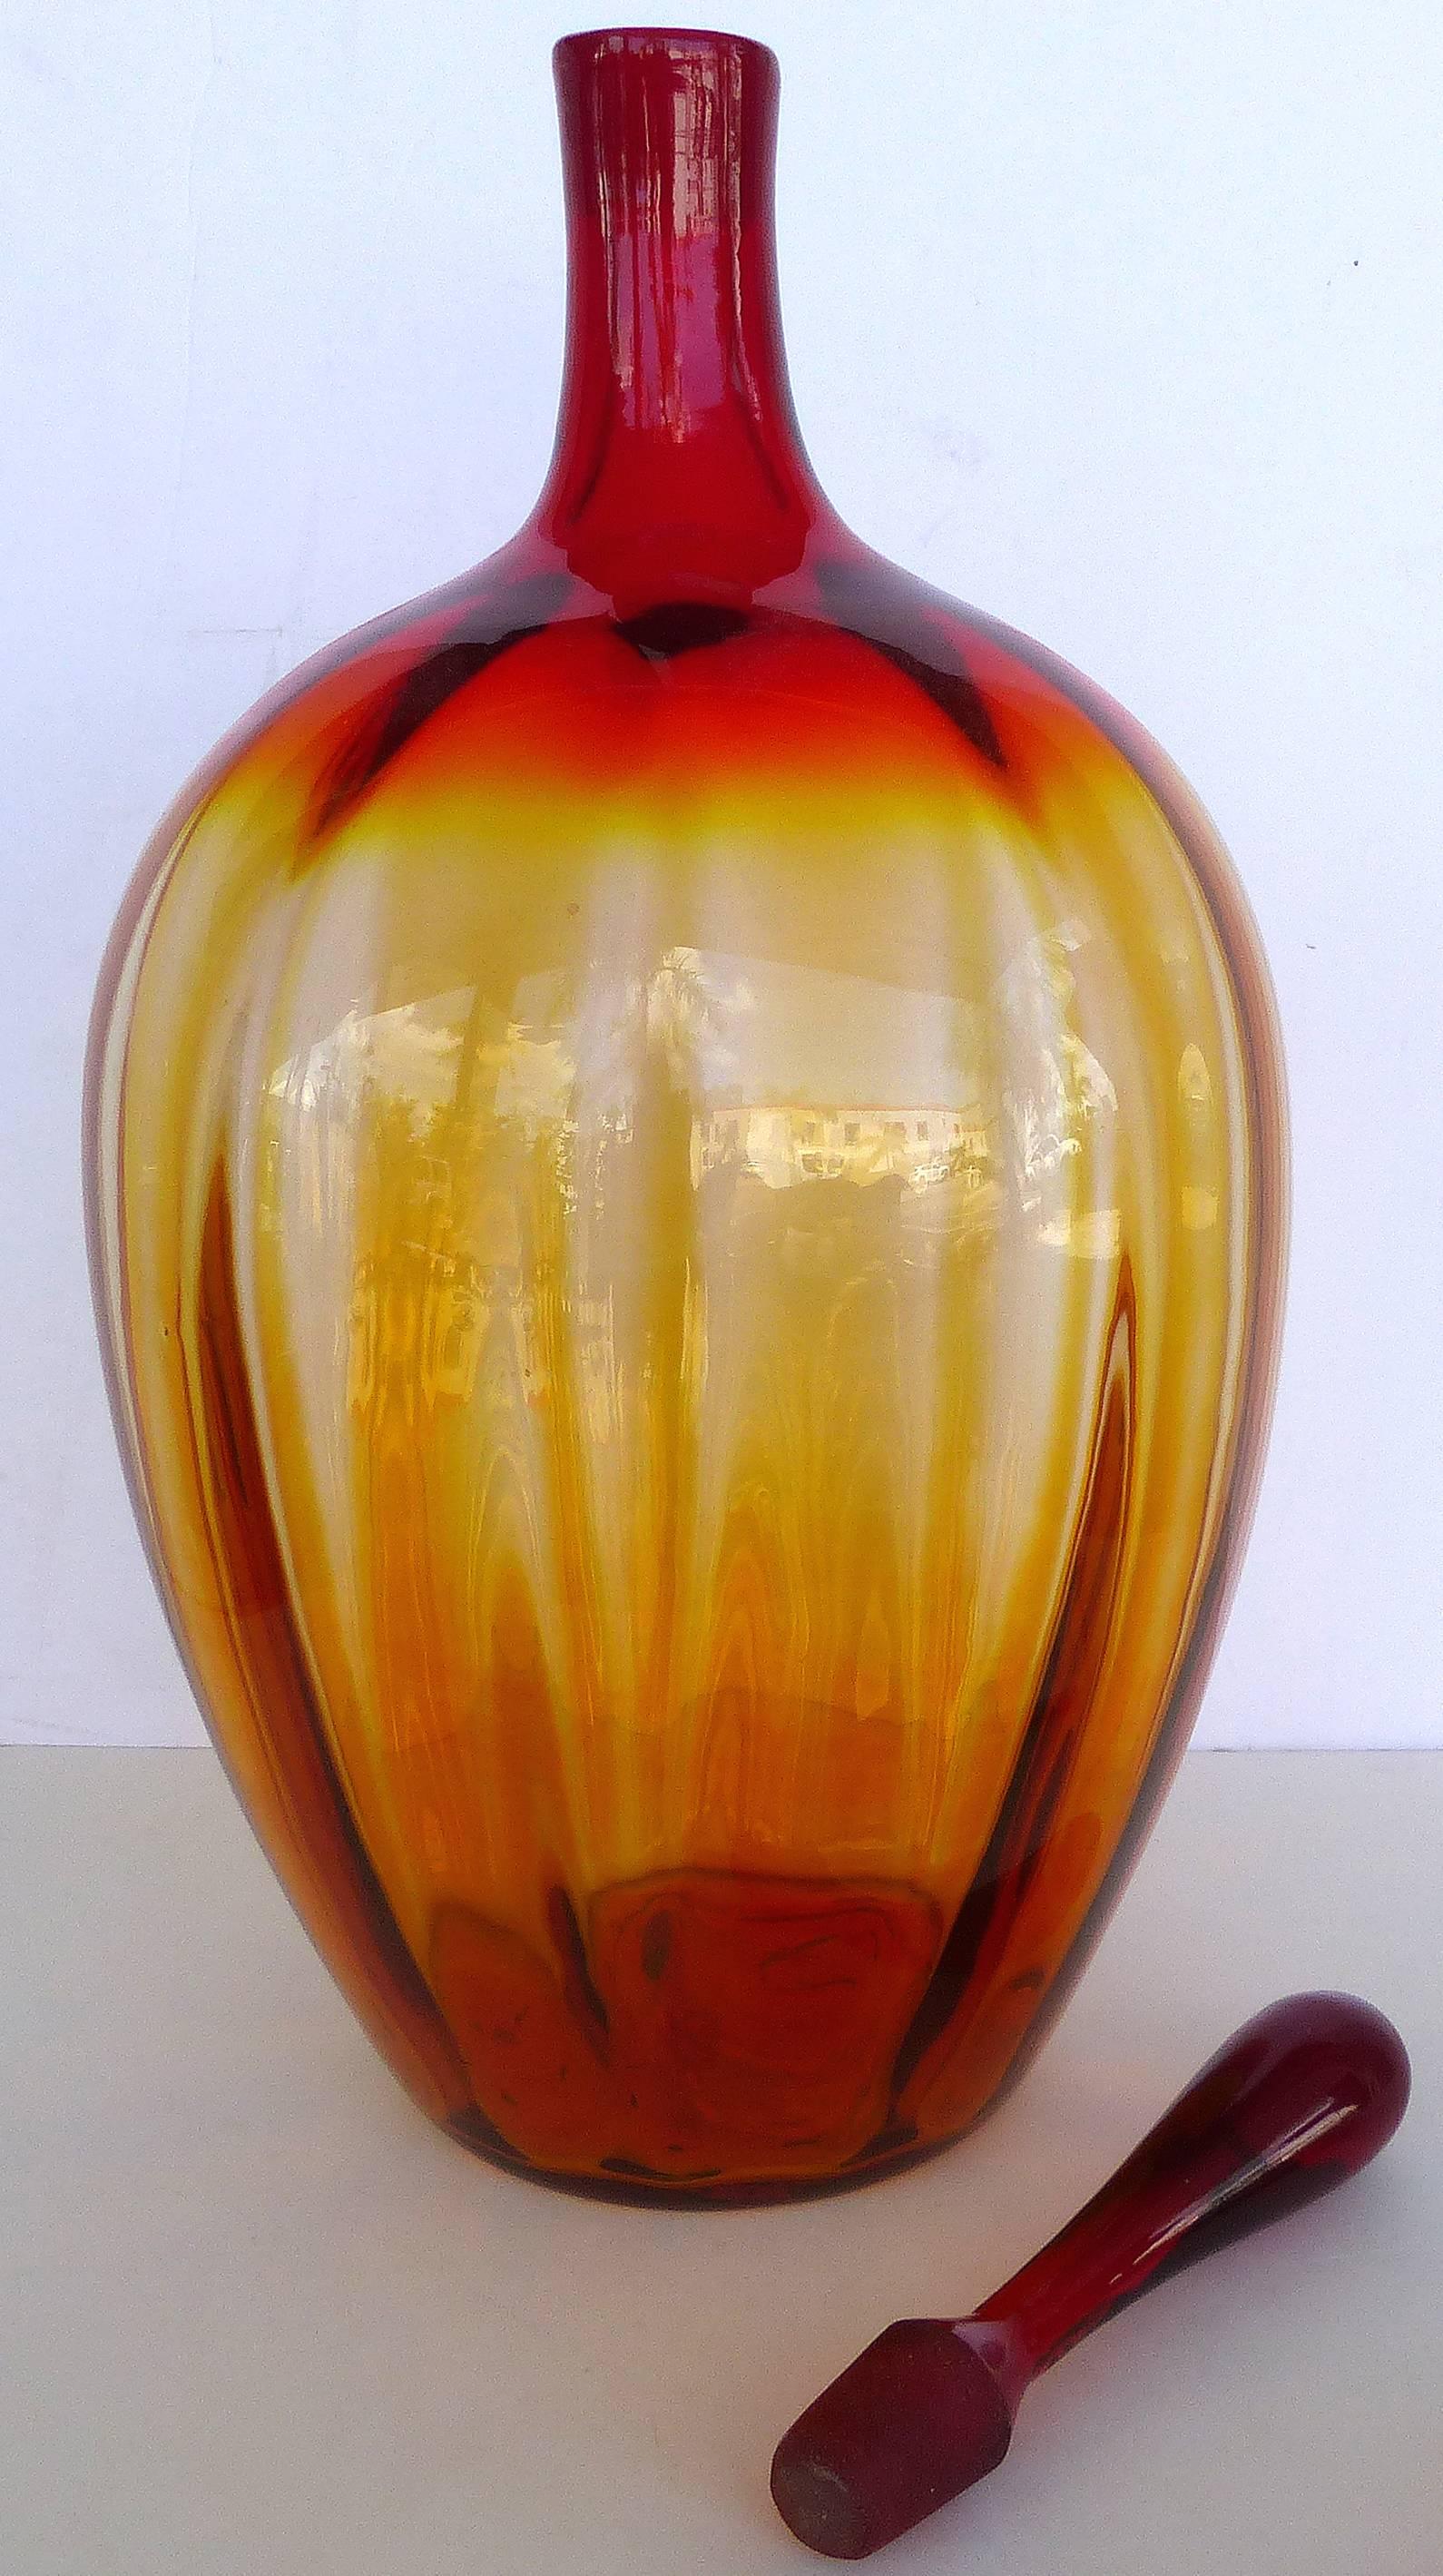 Blenko Large Decorative Bottle with Stopper

Offered for sale is a large Blenko bottle with stopper that has red to amber glass with a ribbed bulbous body. The height of the vessel without the stopper is 18